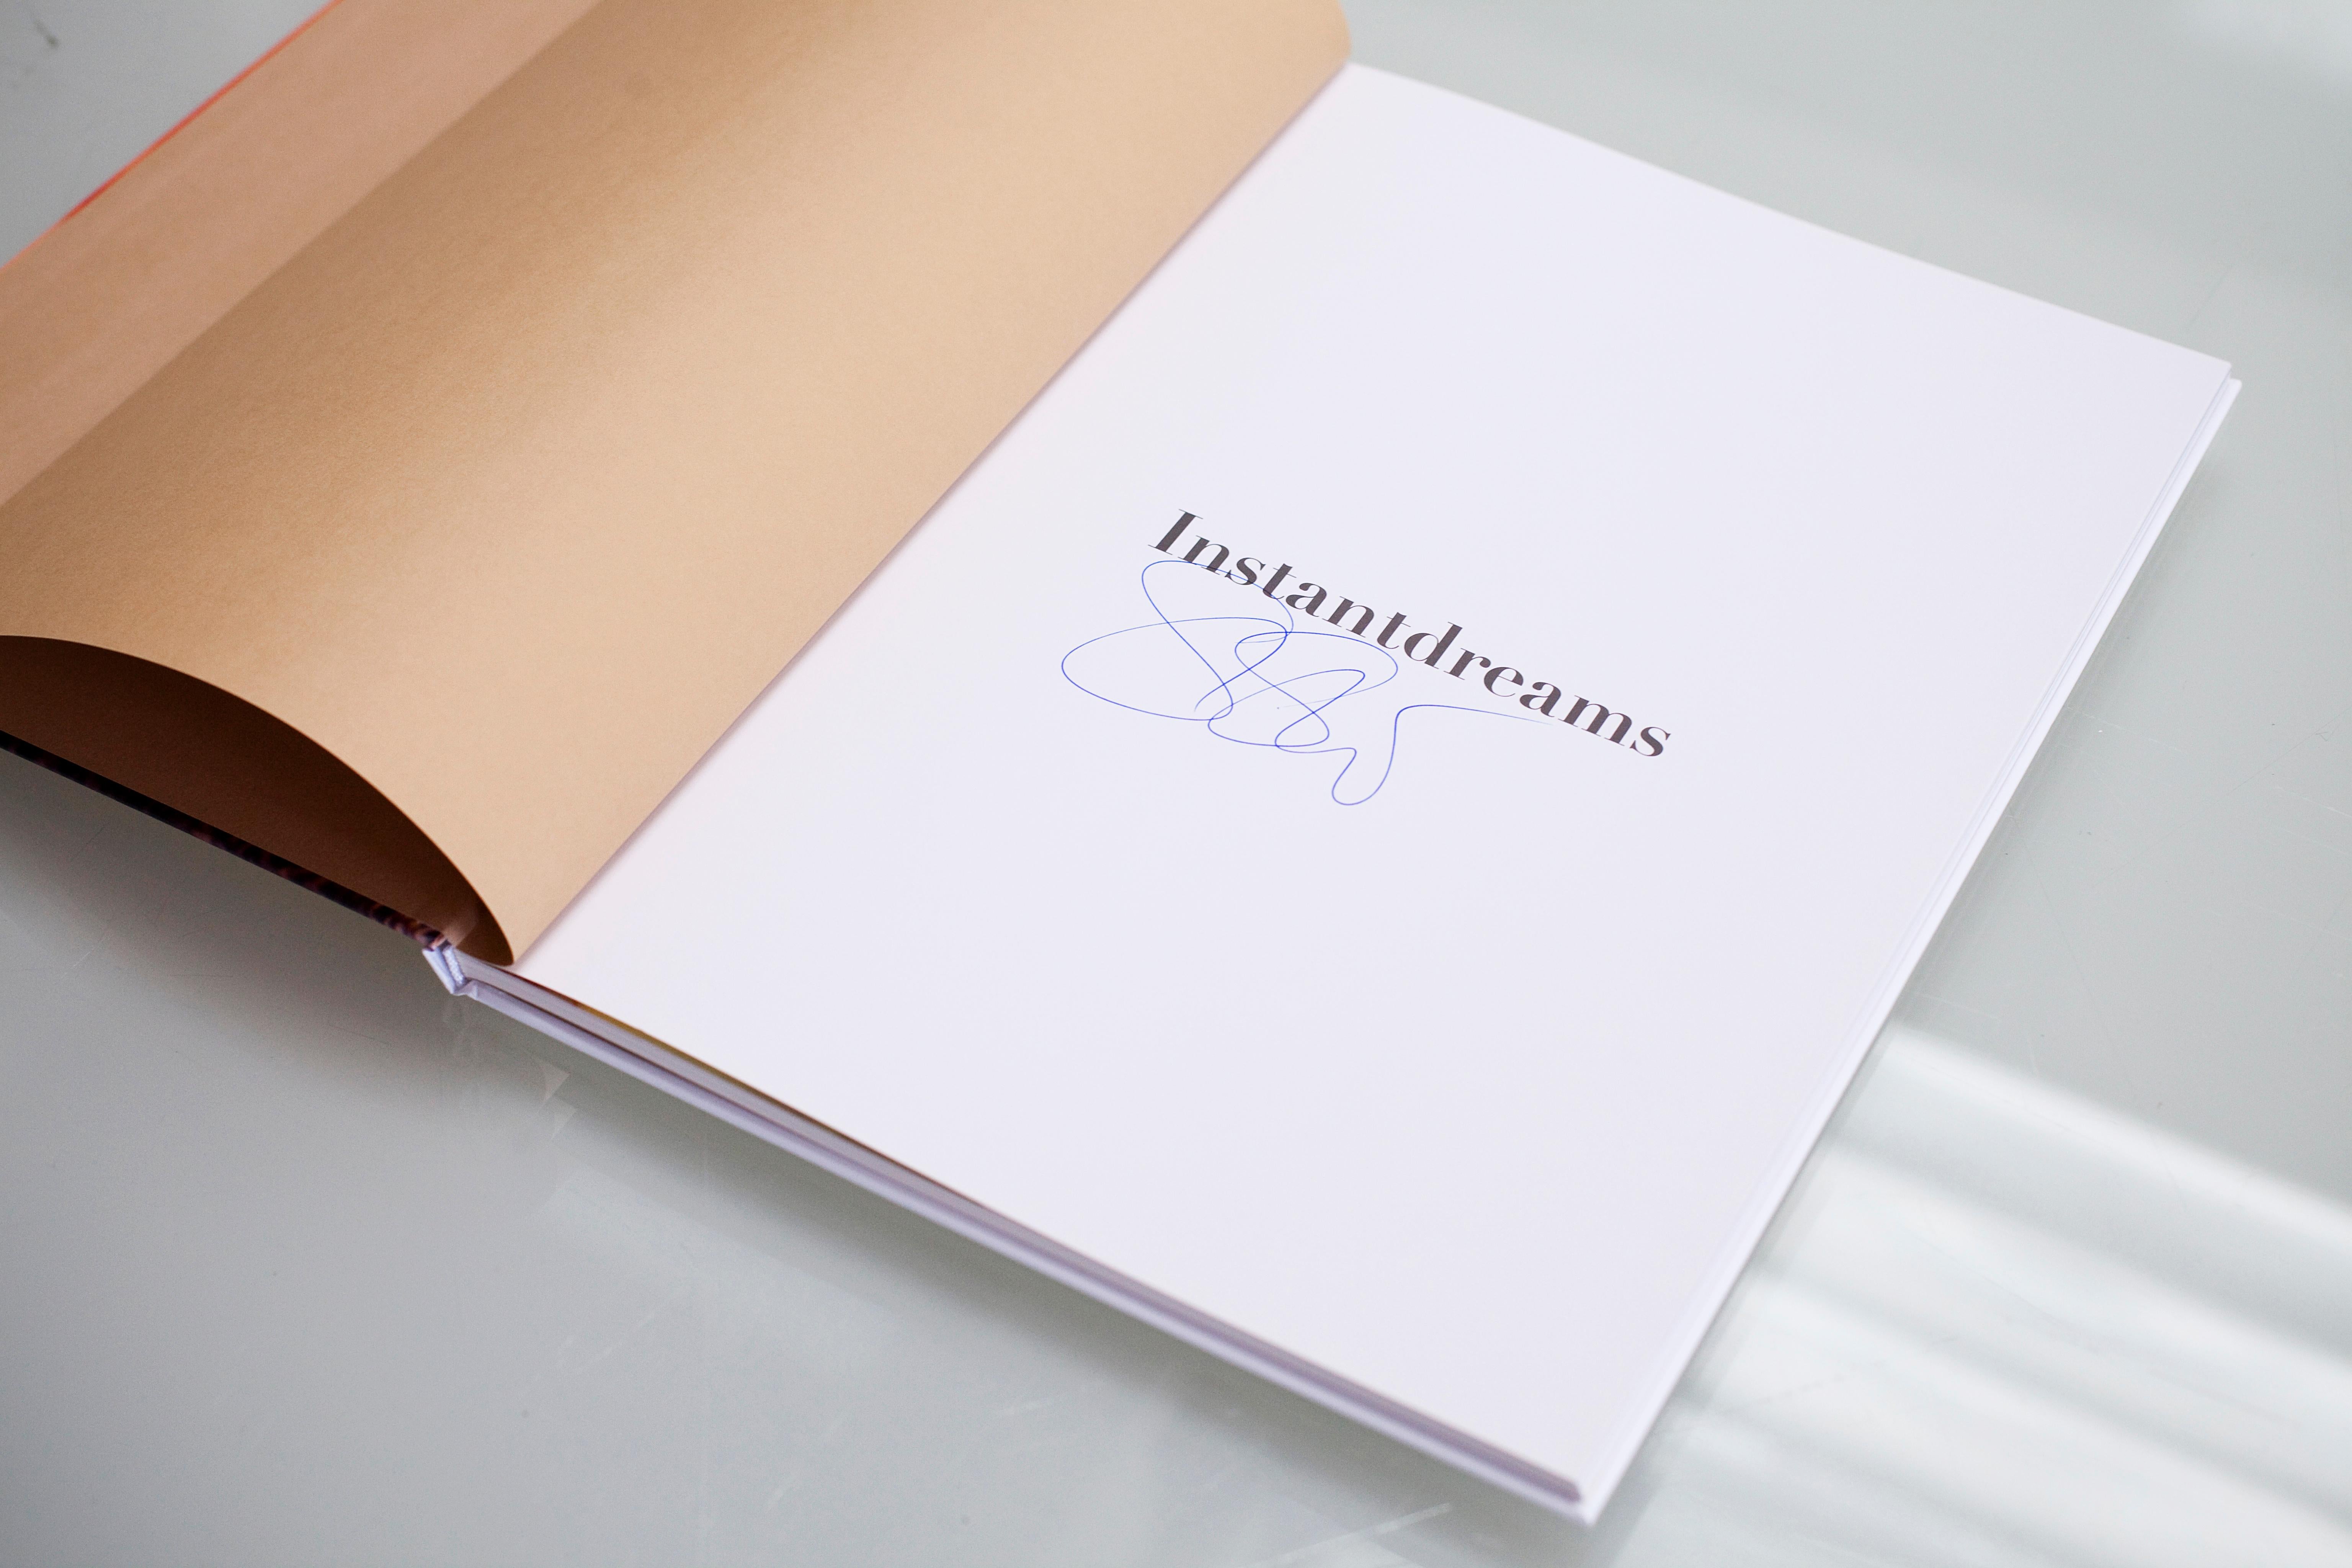 INSTANTDREAMS published by Avenso, Berlin, 2014  - Monograph and C-Print - Photograph by Stefanie Schneider